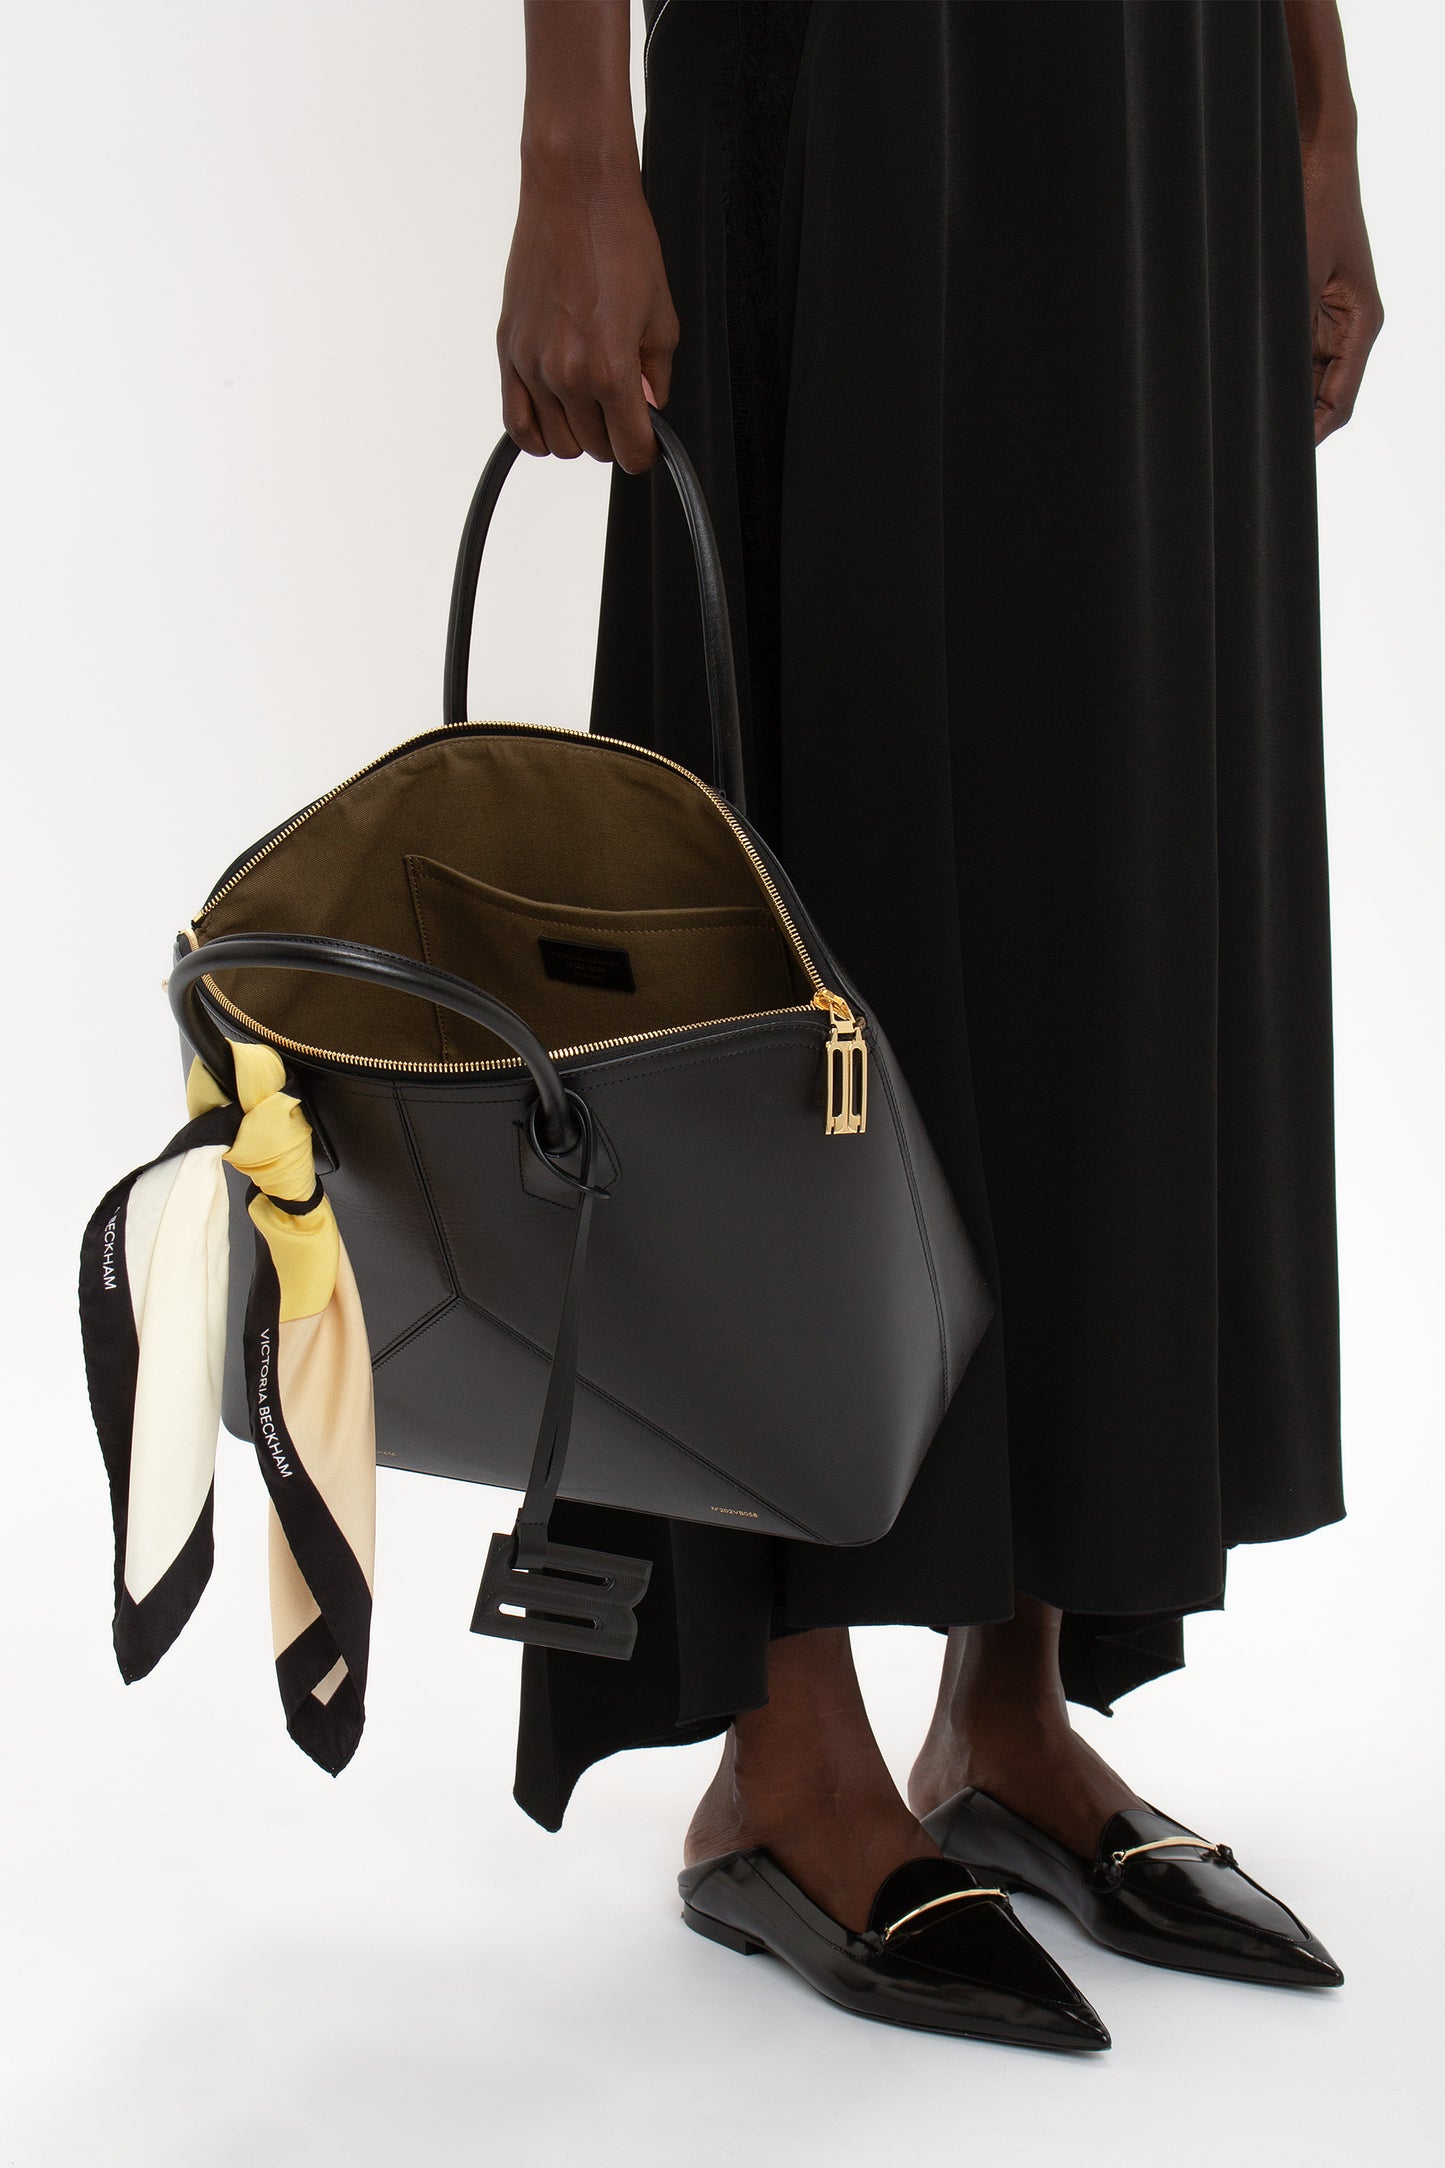 Person holding a Victoria Beckham Victoria Bag In Black Leather tied with a yellow and white scarf, wearing a black dress and black pointed shoes.